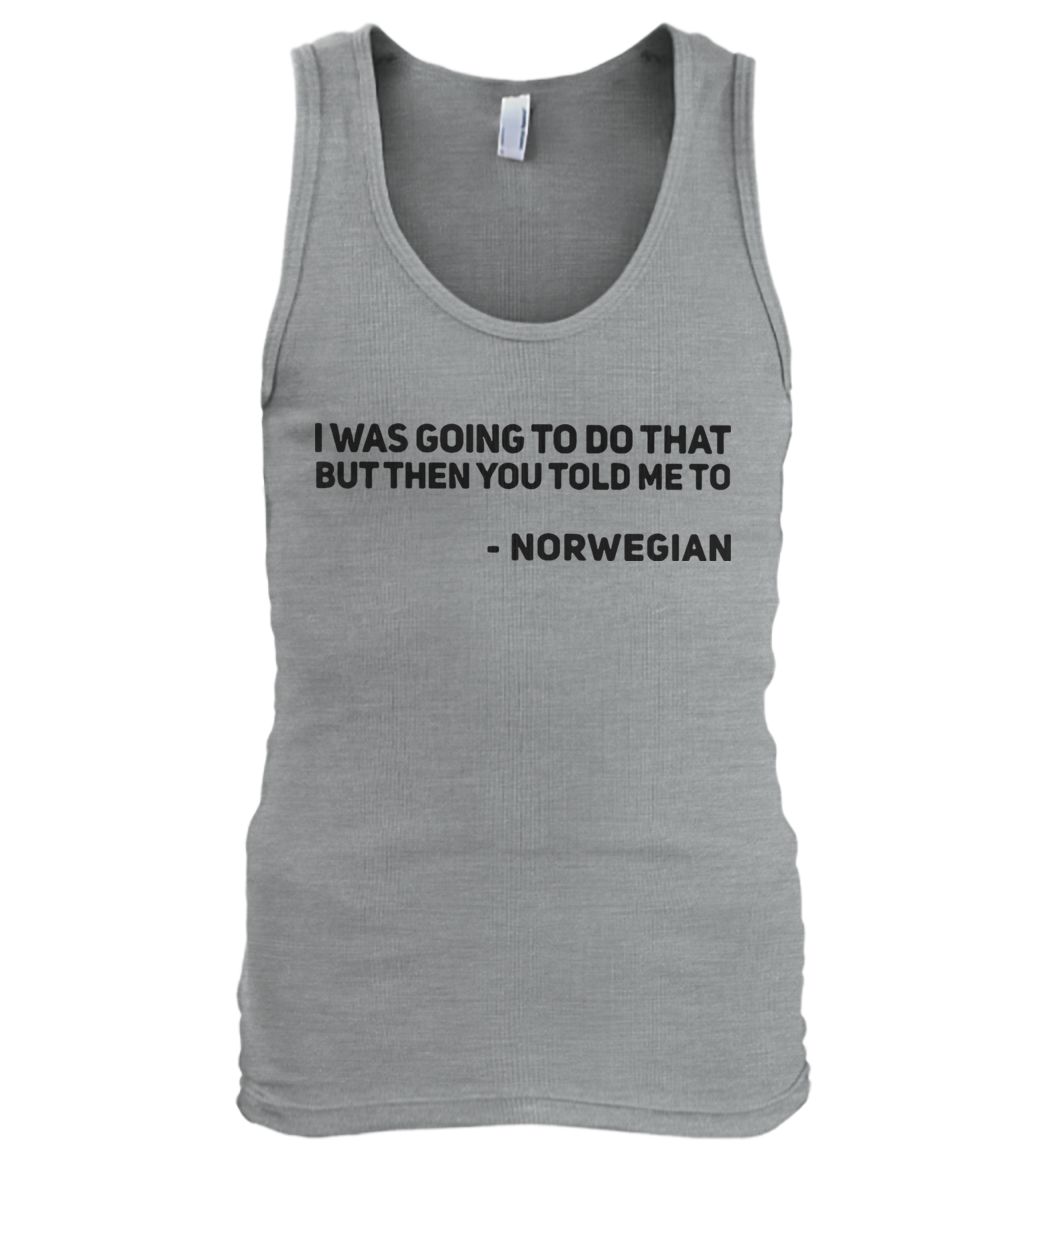 I was going to do that but then you told me to norwegian men's tank top